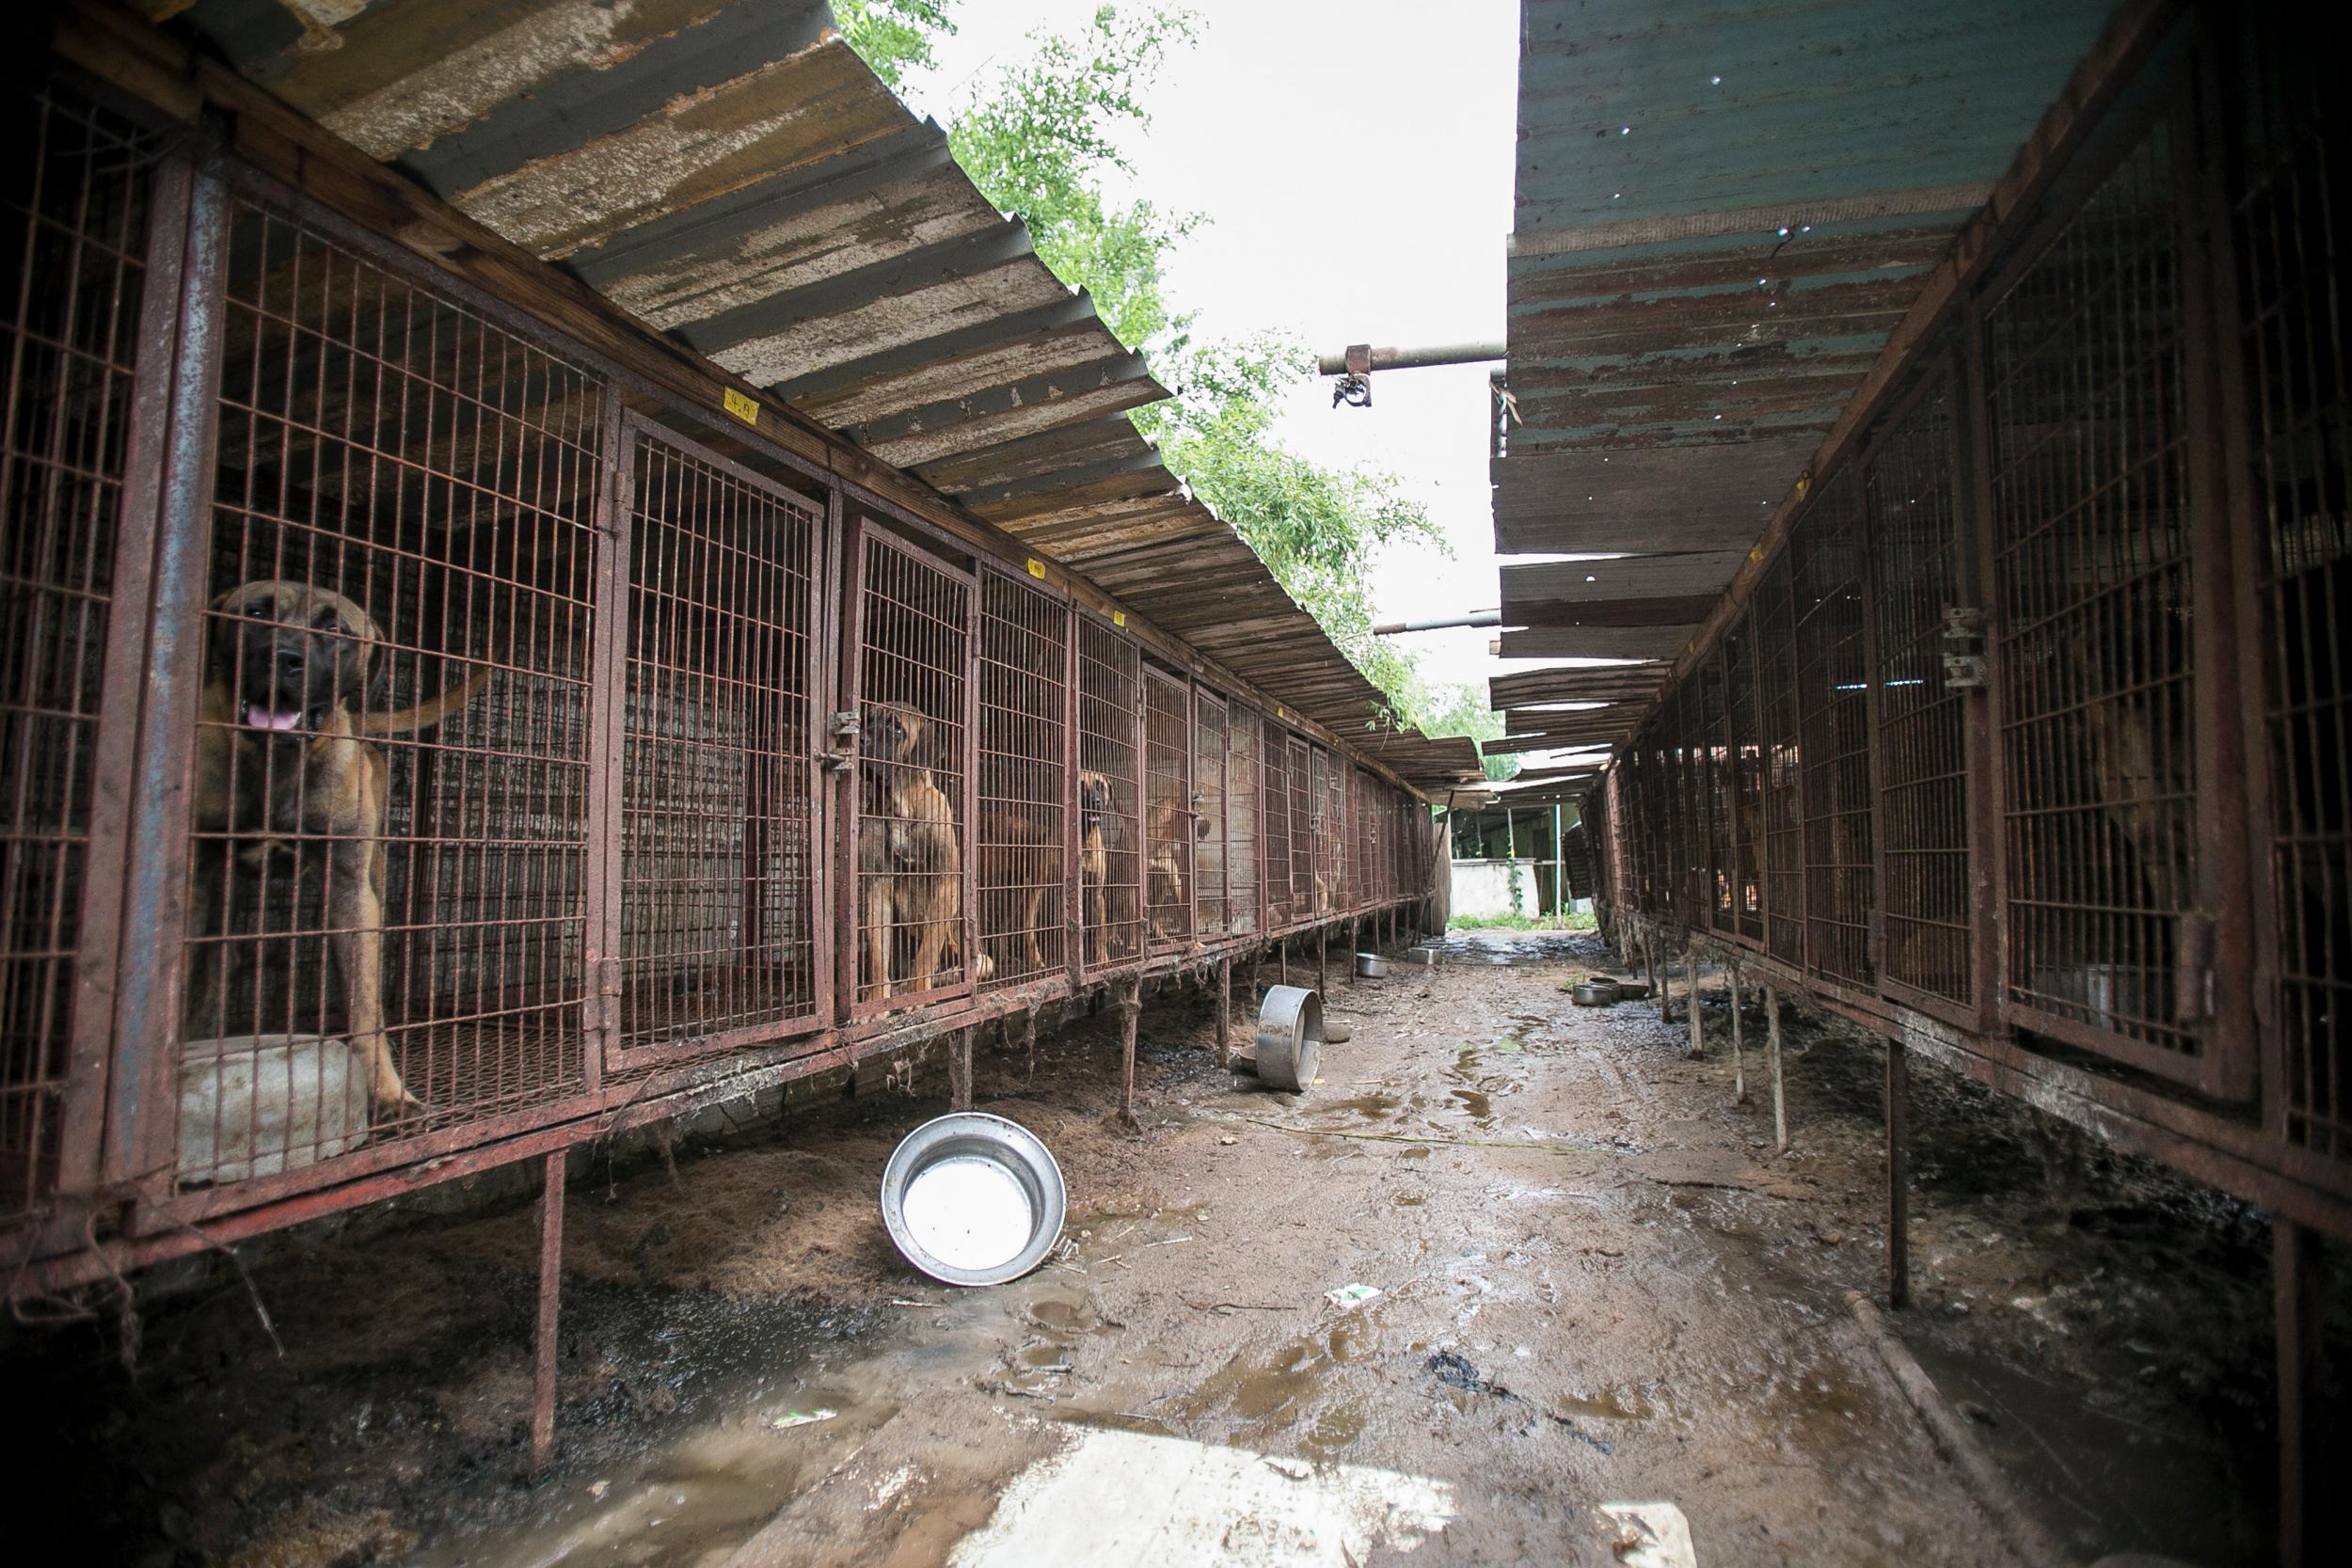 The charity freed 149 dogs in Yesan